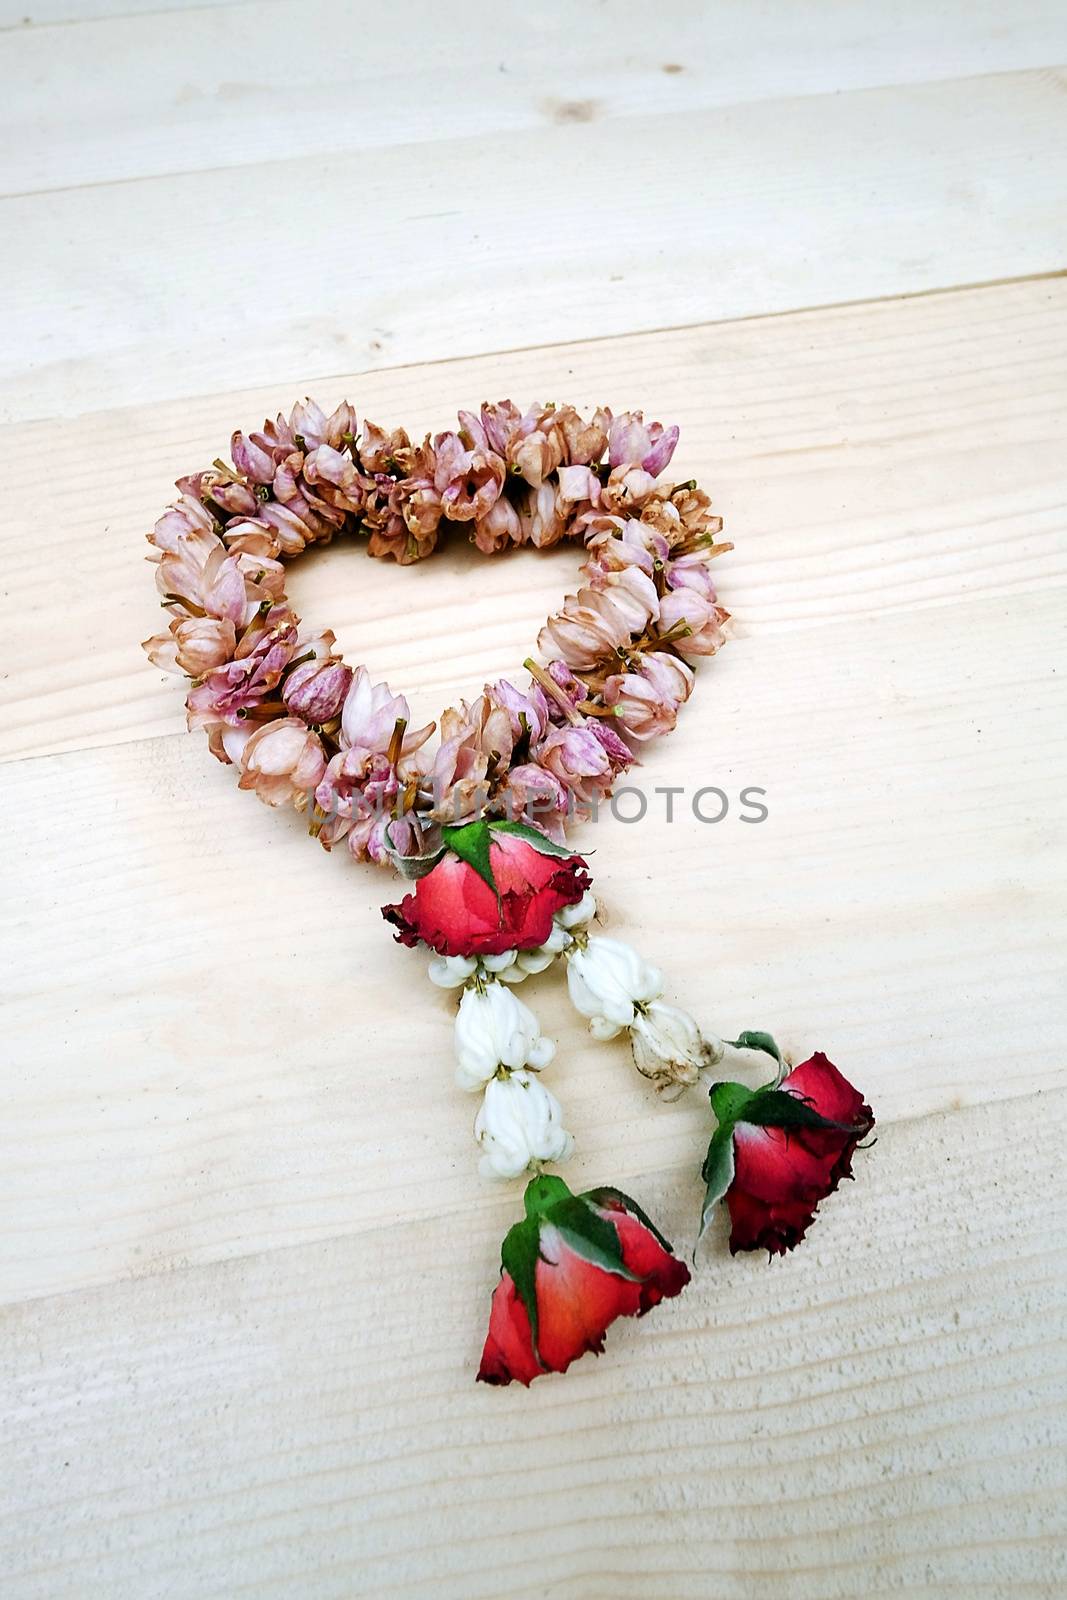 Dry Jasmine and Rose Flower Wreath Thai on the Table Wooden by aonip